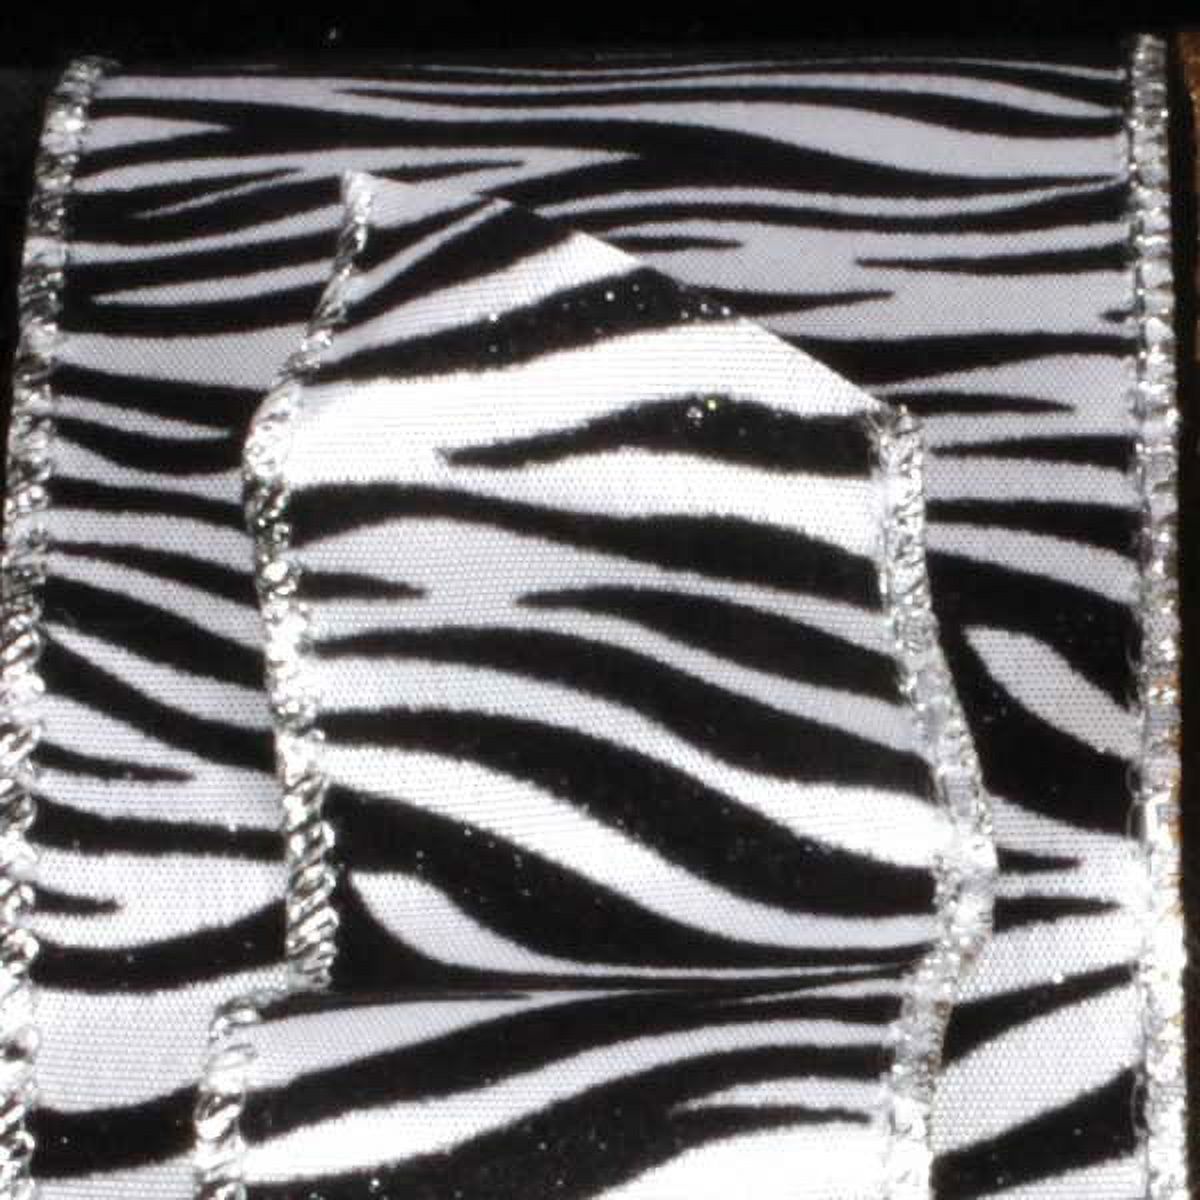 The Ribbon People Zebra Stripes Black and White Wildlife Wired Craft Ribbon 2.5" x 20 Yards - image 1 of 1